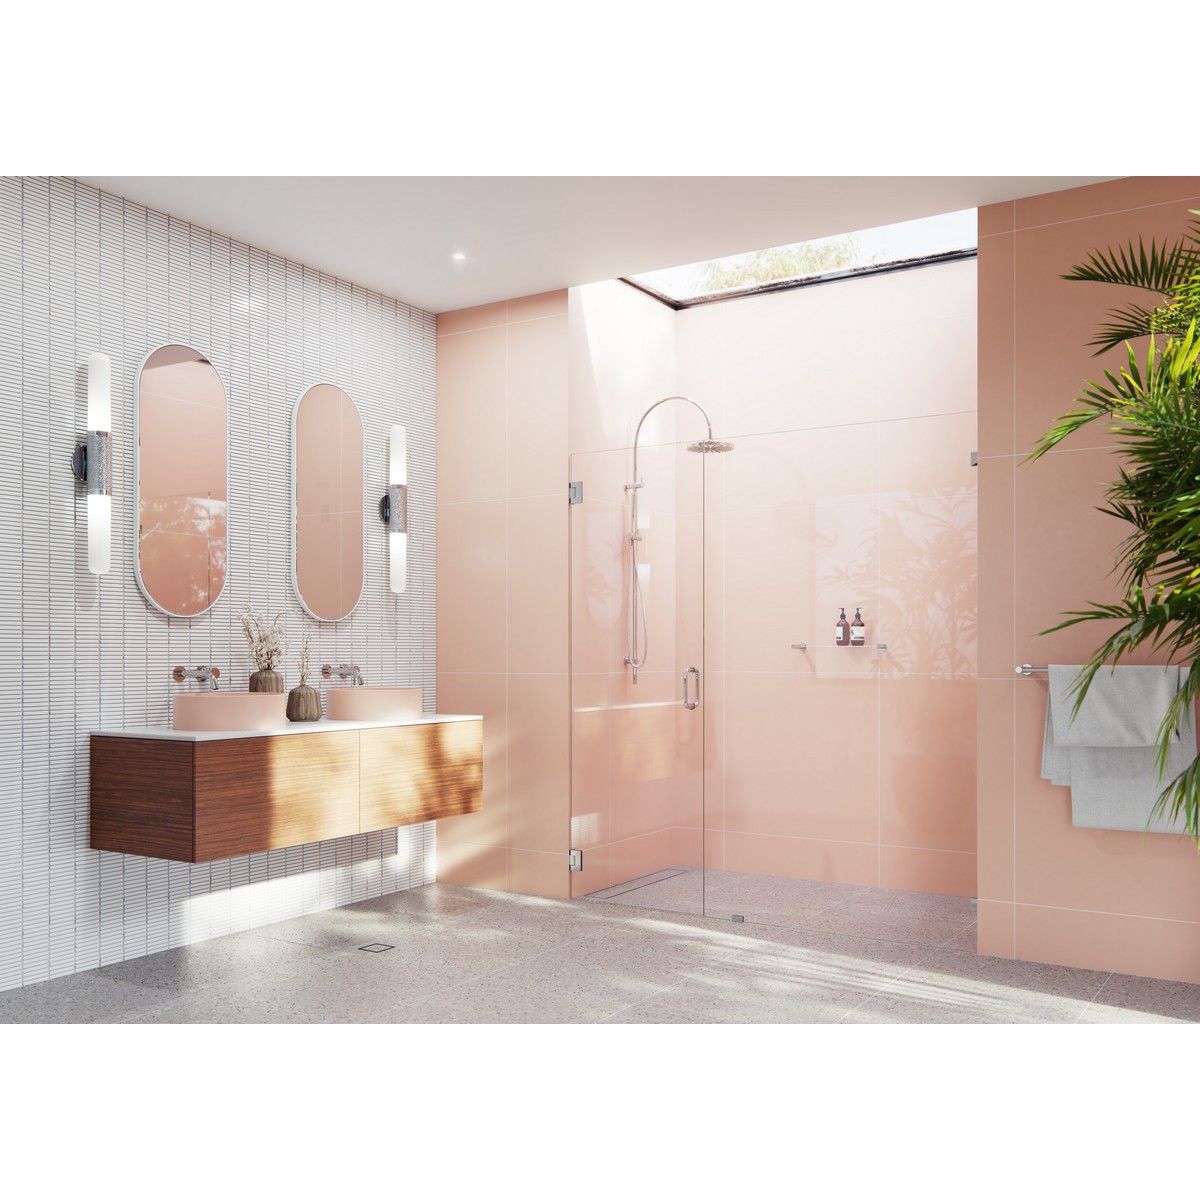 GLASS WAREHOUSE GW-WH-69.25 ILLUME 69 1/4 W X 78 H WALL HINGED FULLY FRAMELESS GLASS SHOWER ENCLOSURE